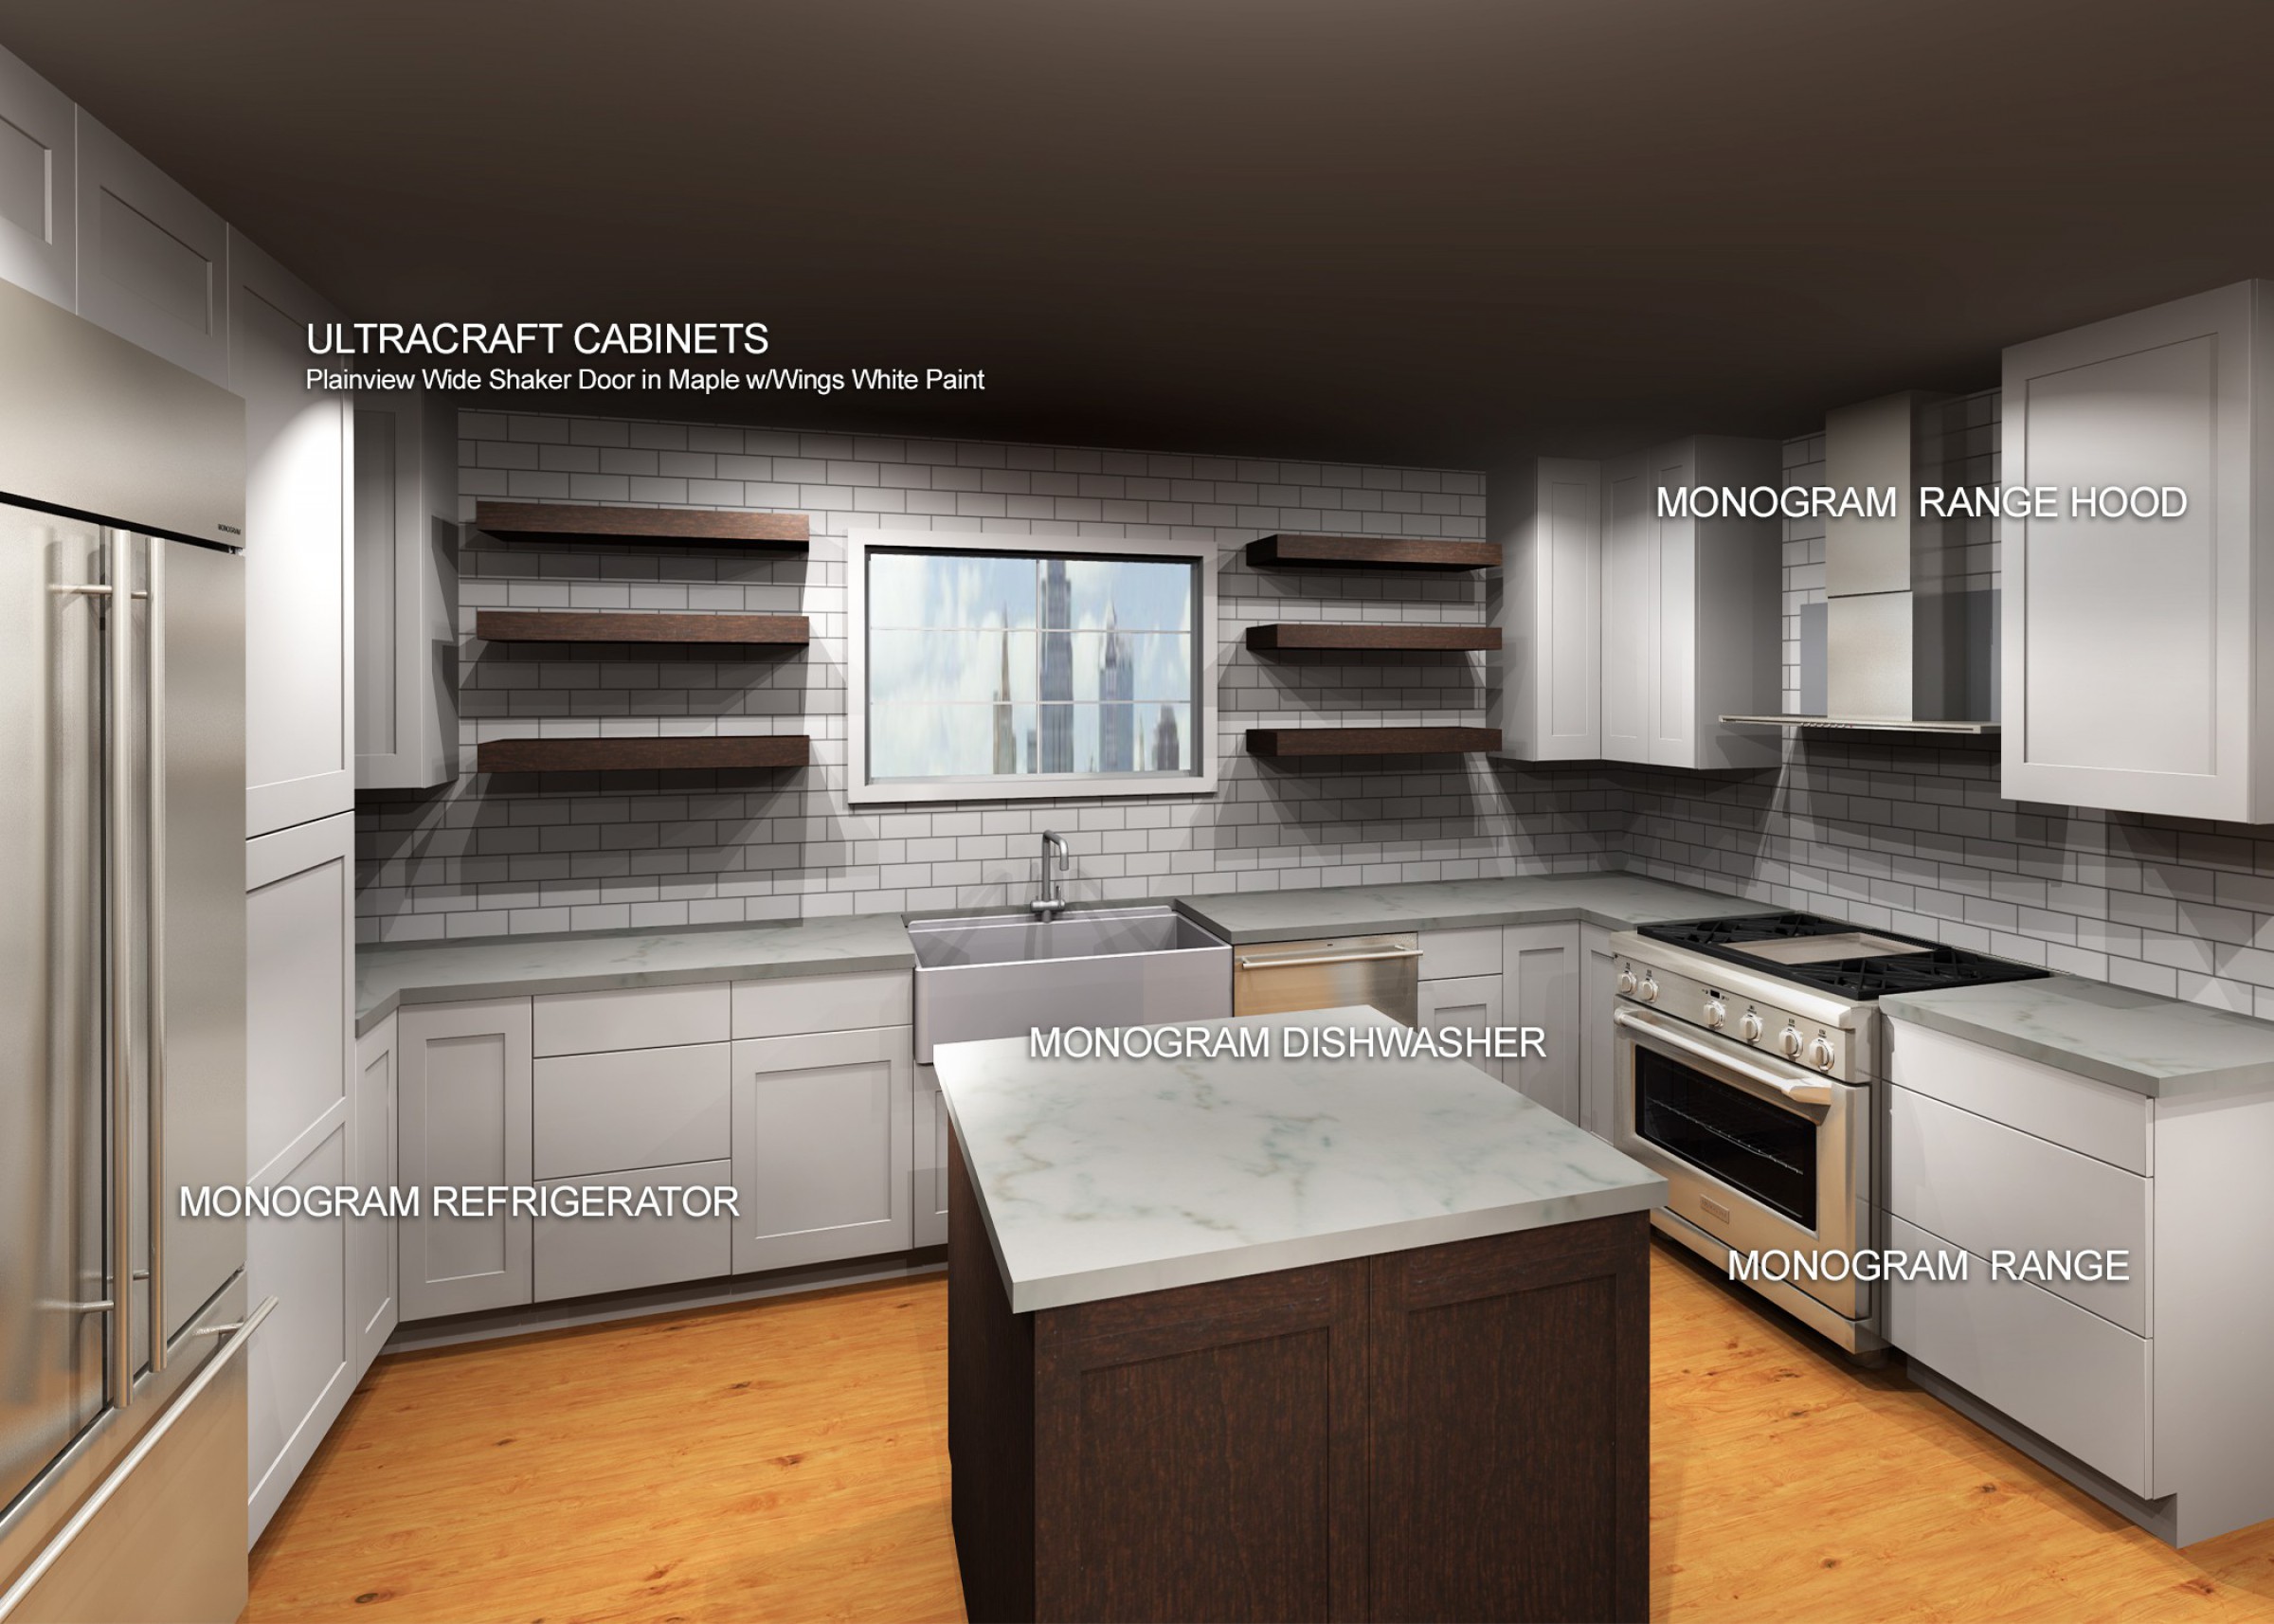 Ultracraft Cabinets with Monogram Appliance Package